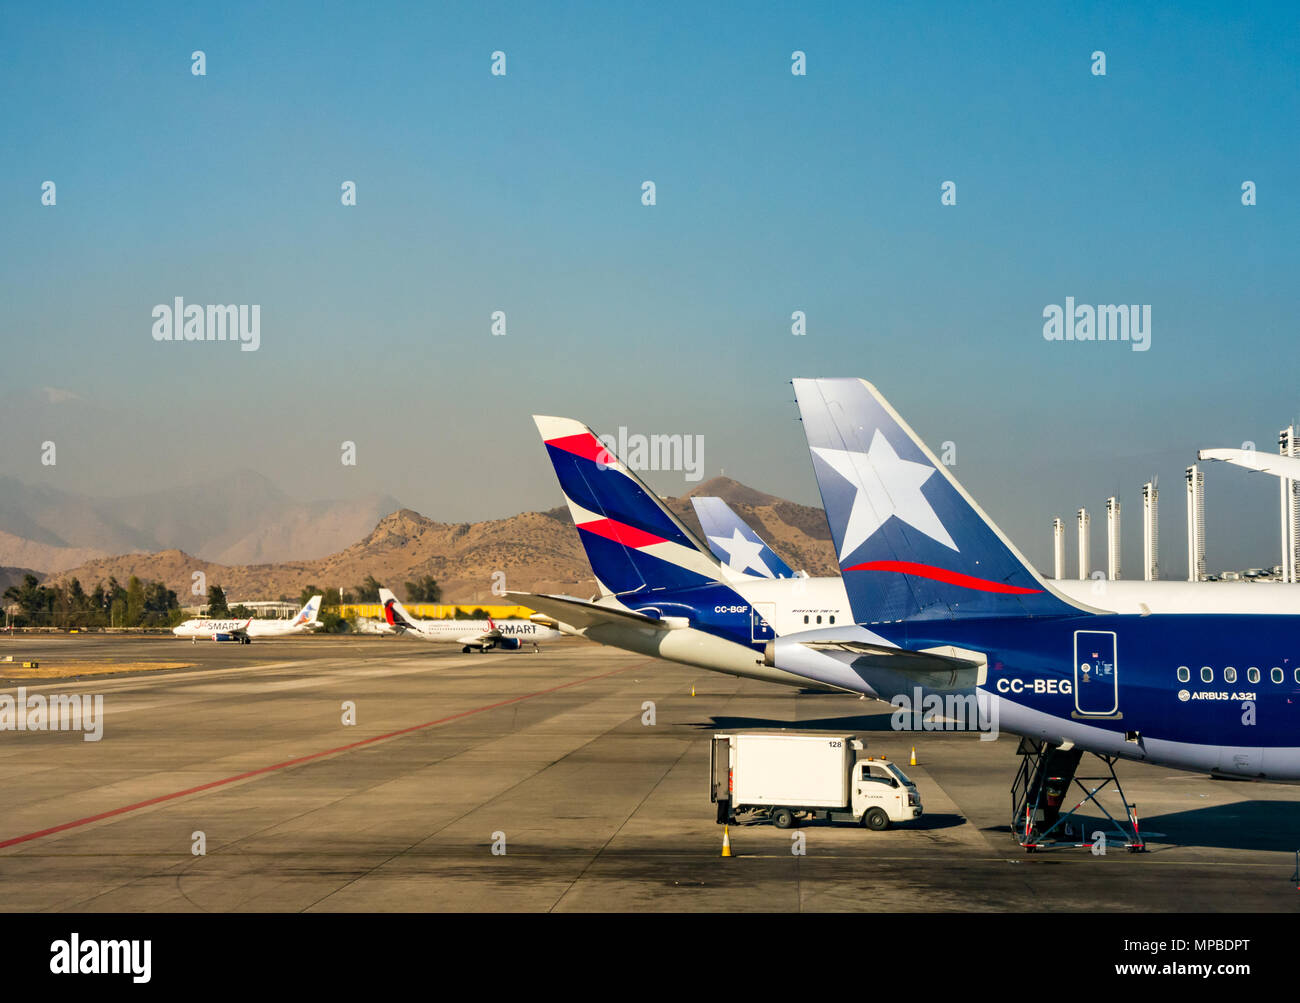 View from plane window, Santiago International airport of LATAM aeroplanes. New and old airline logos joining LAN and TAM airlines & SMART airline Stock Photo